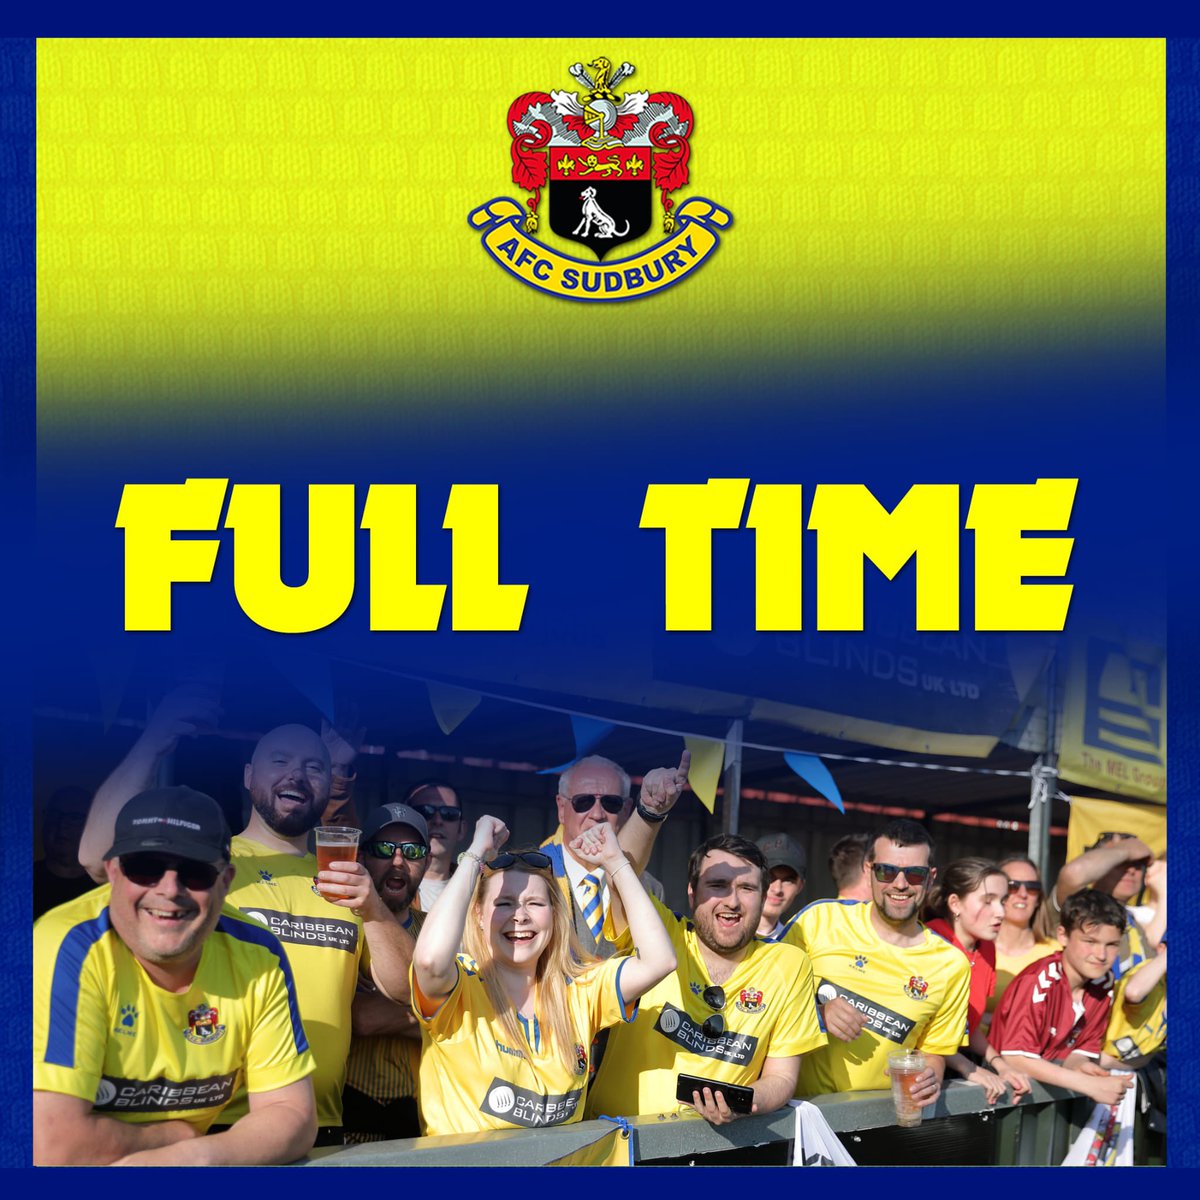 WHAT A WIN
WHAT A CLUB

MARC ABBOTTS YELLOW BLUE ARMY

Bromsgrove Sporting 0-2 AFC Sudbury